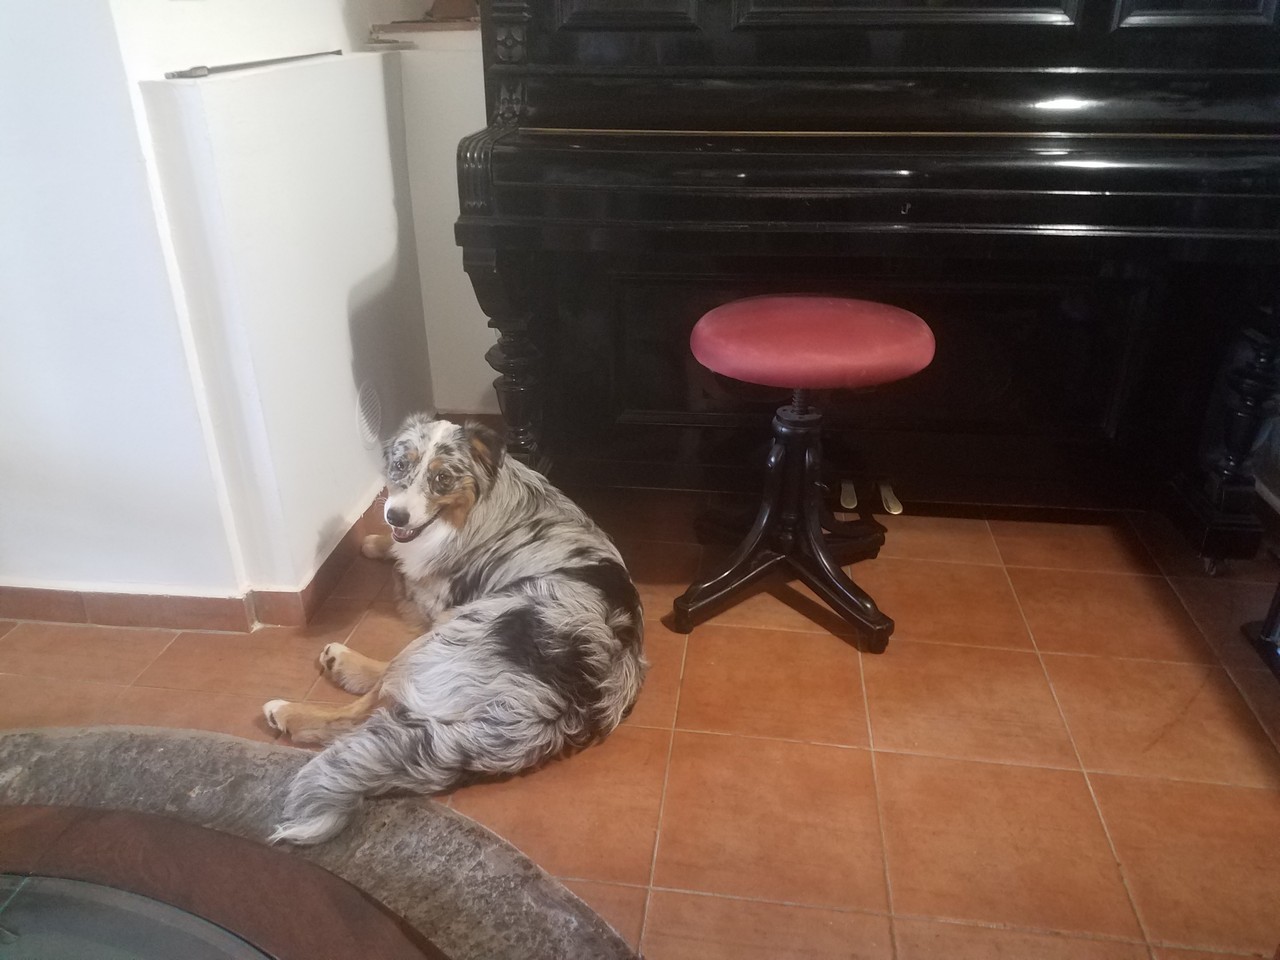 a dog lying on the floor next to a piano